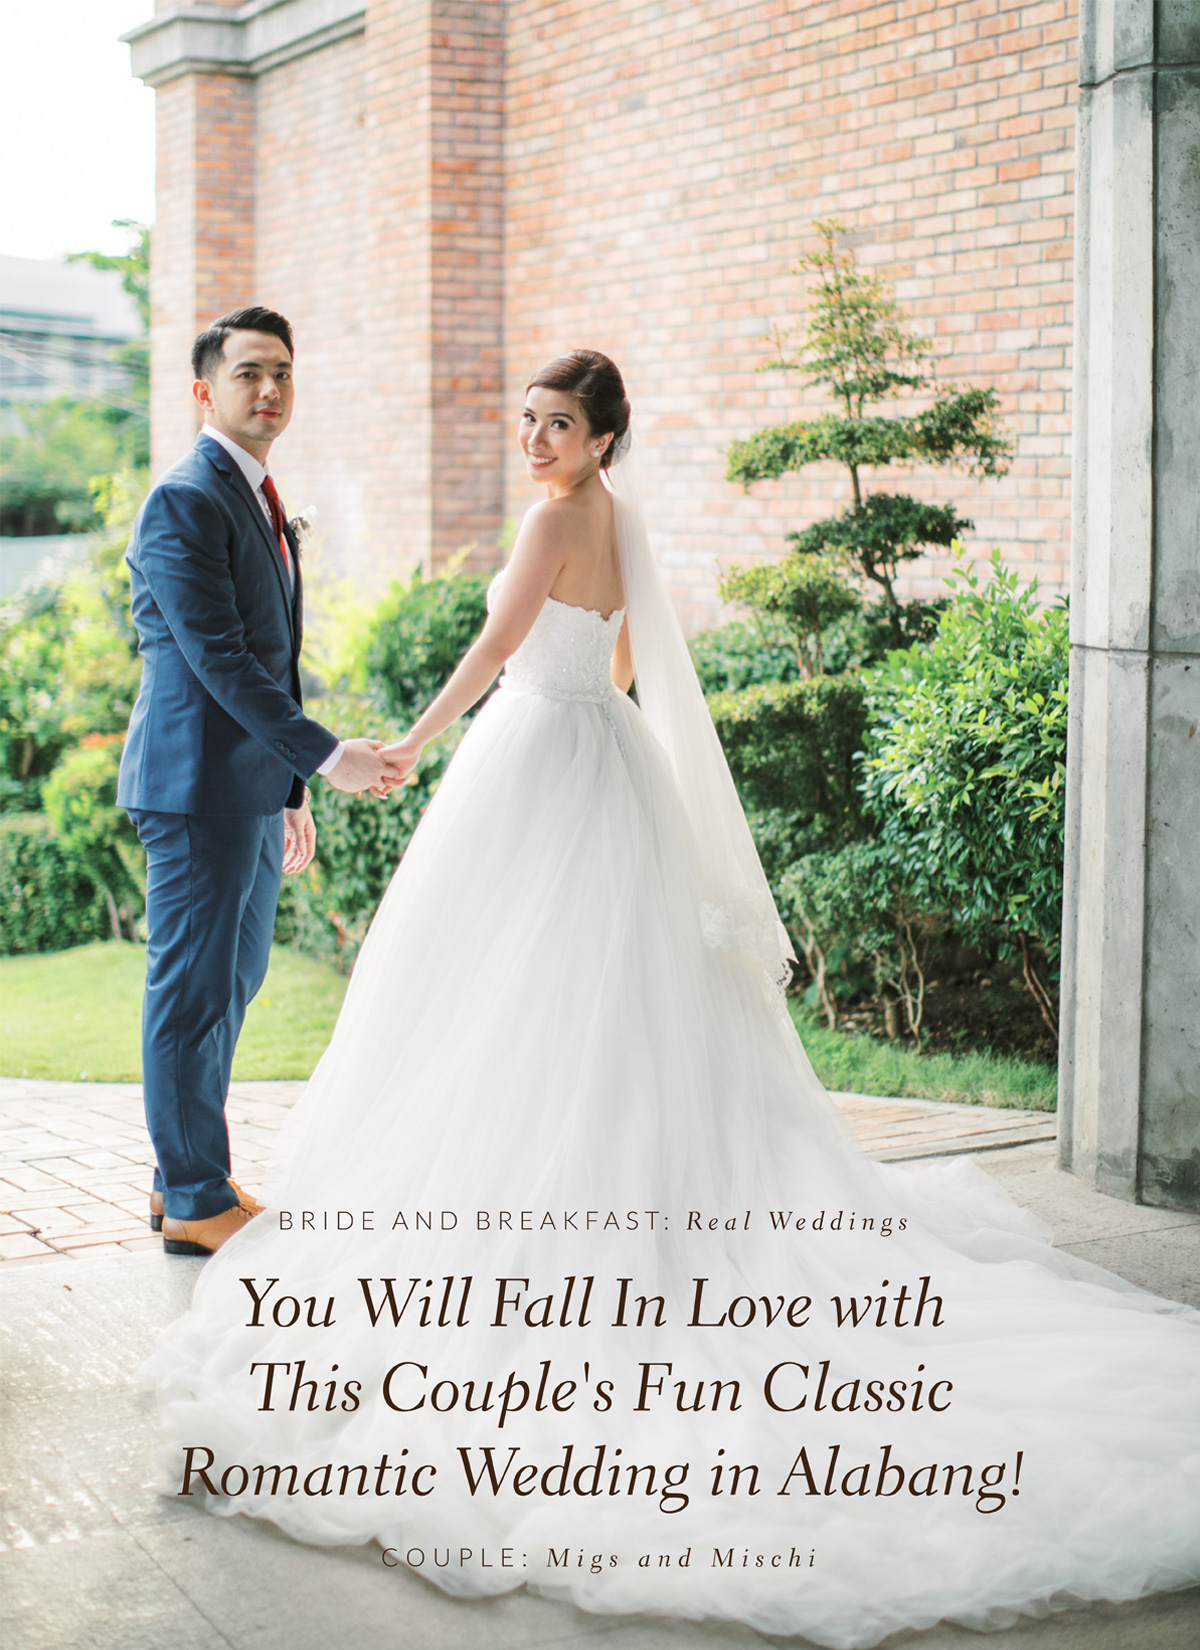 You Will Fall In Love with This Couple's Fun Classic Romantic Wedding in Alabang!